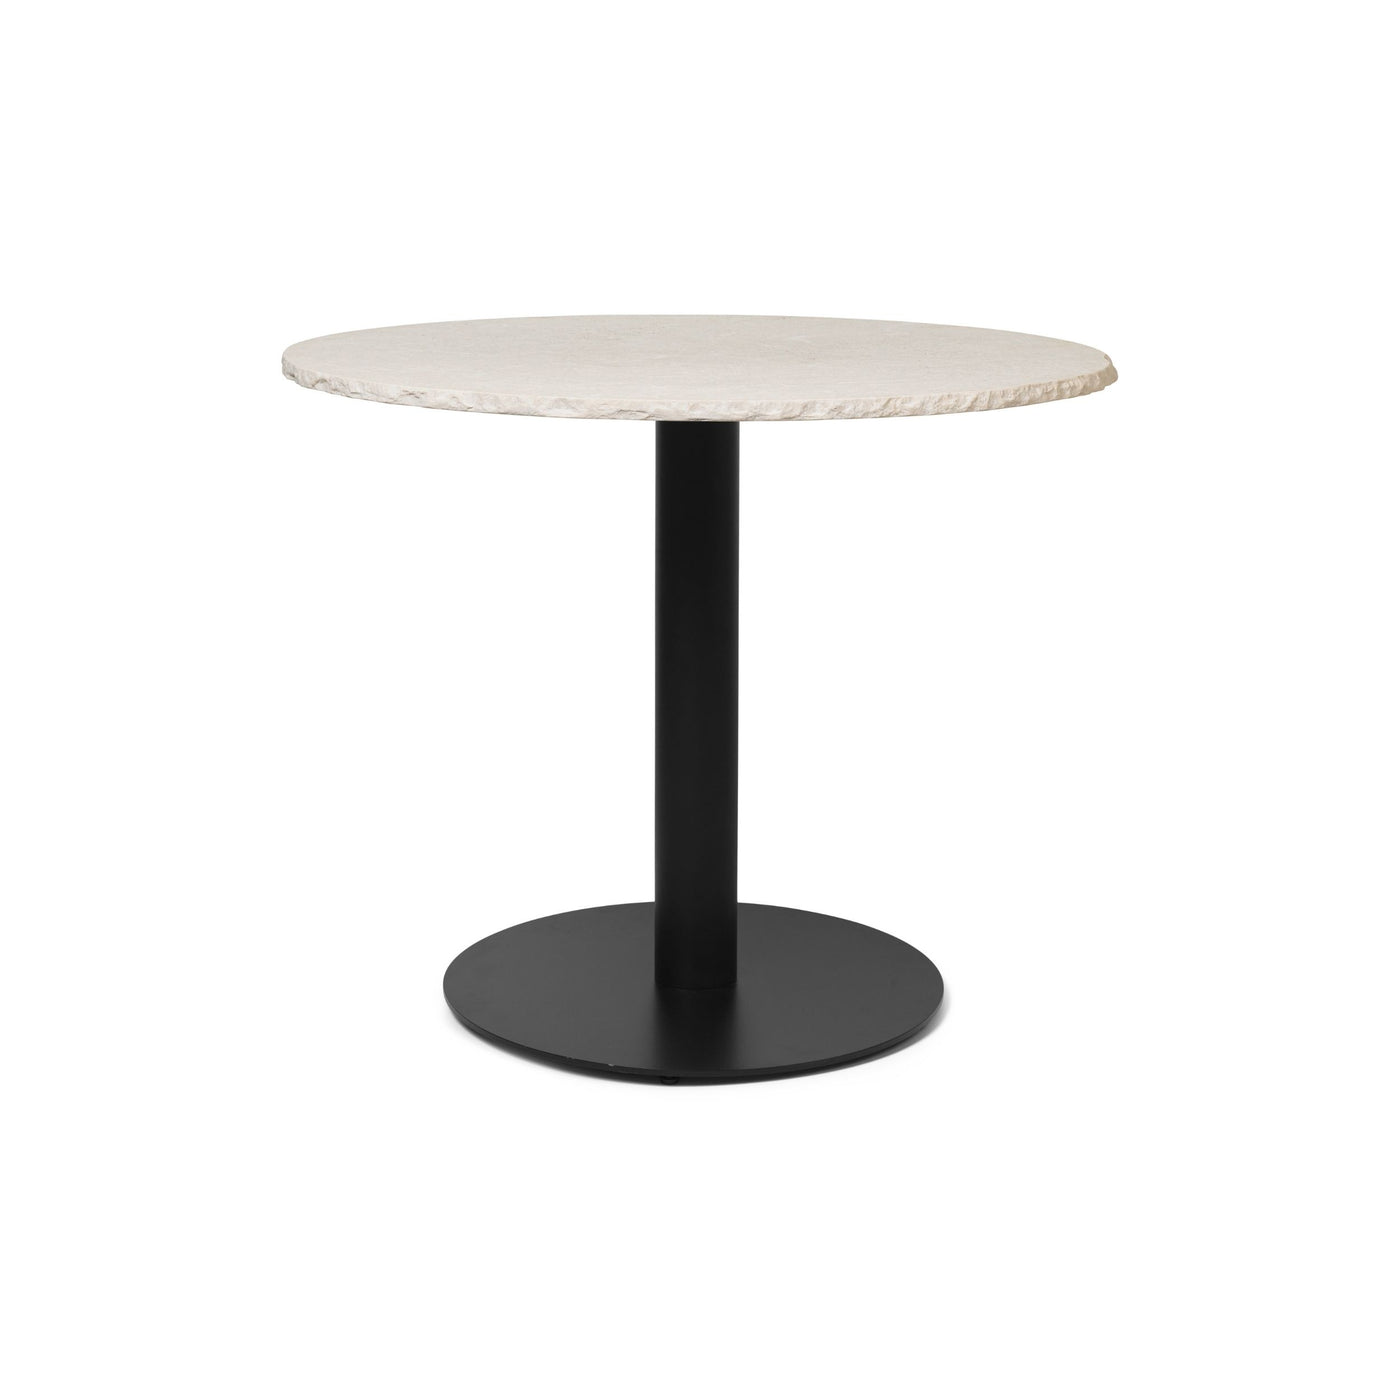 Ferm LIVING Mineral Dining Table. Free UK delivery at someday designs #colour_black